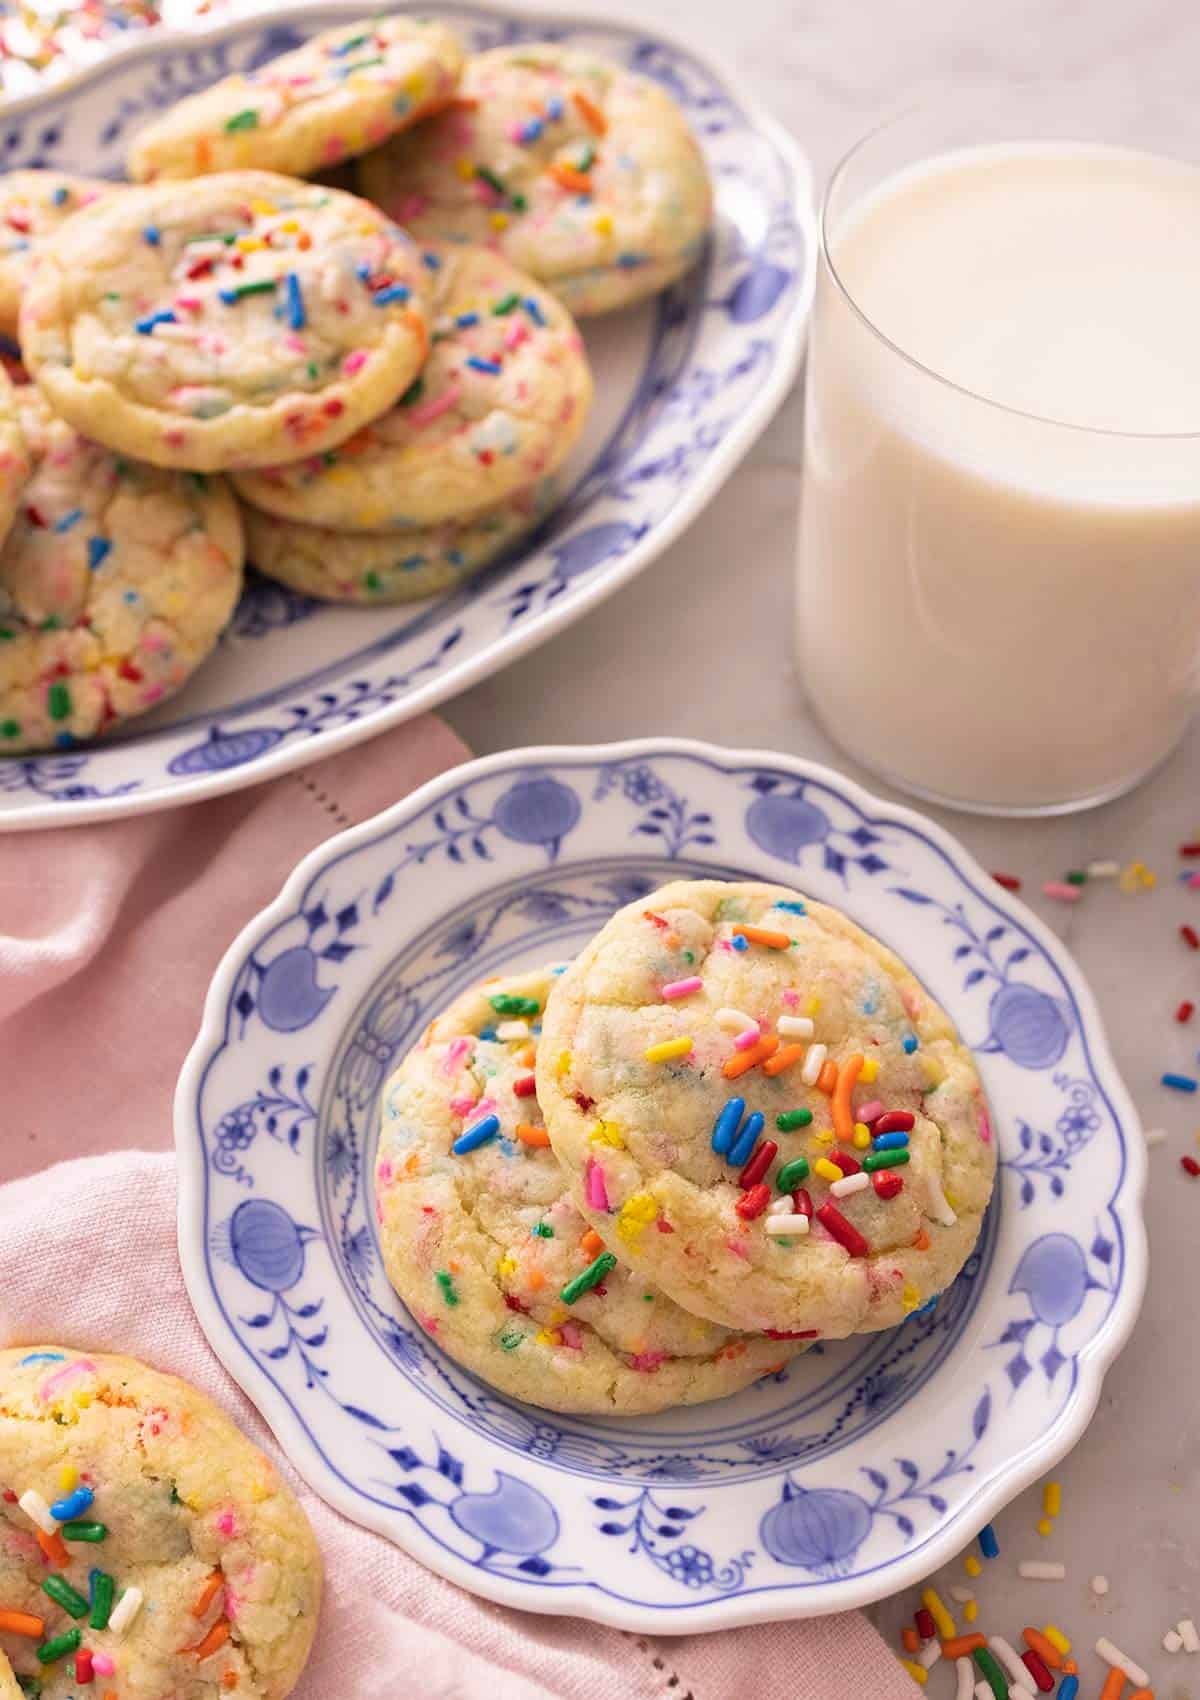 Funfetti cookies on a plate beside a glass of milk.